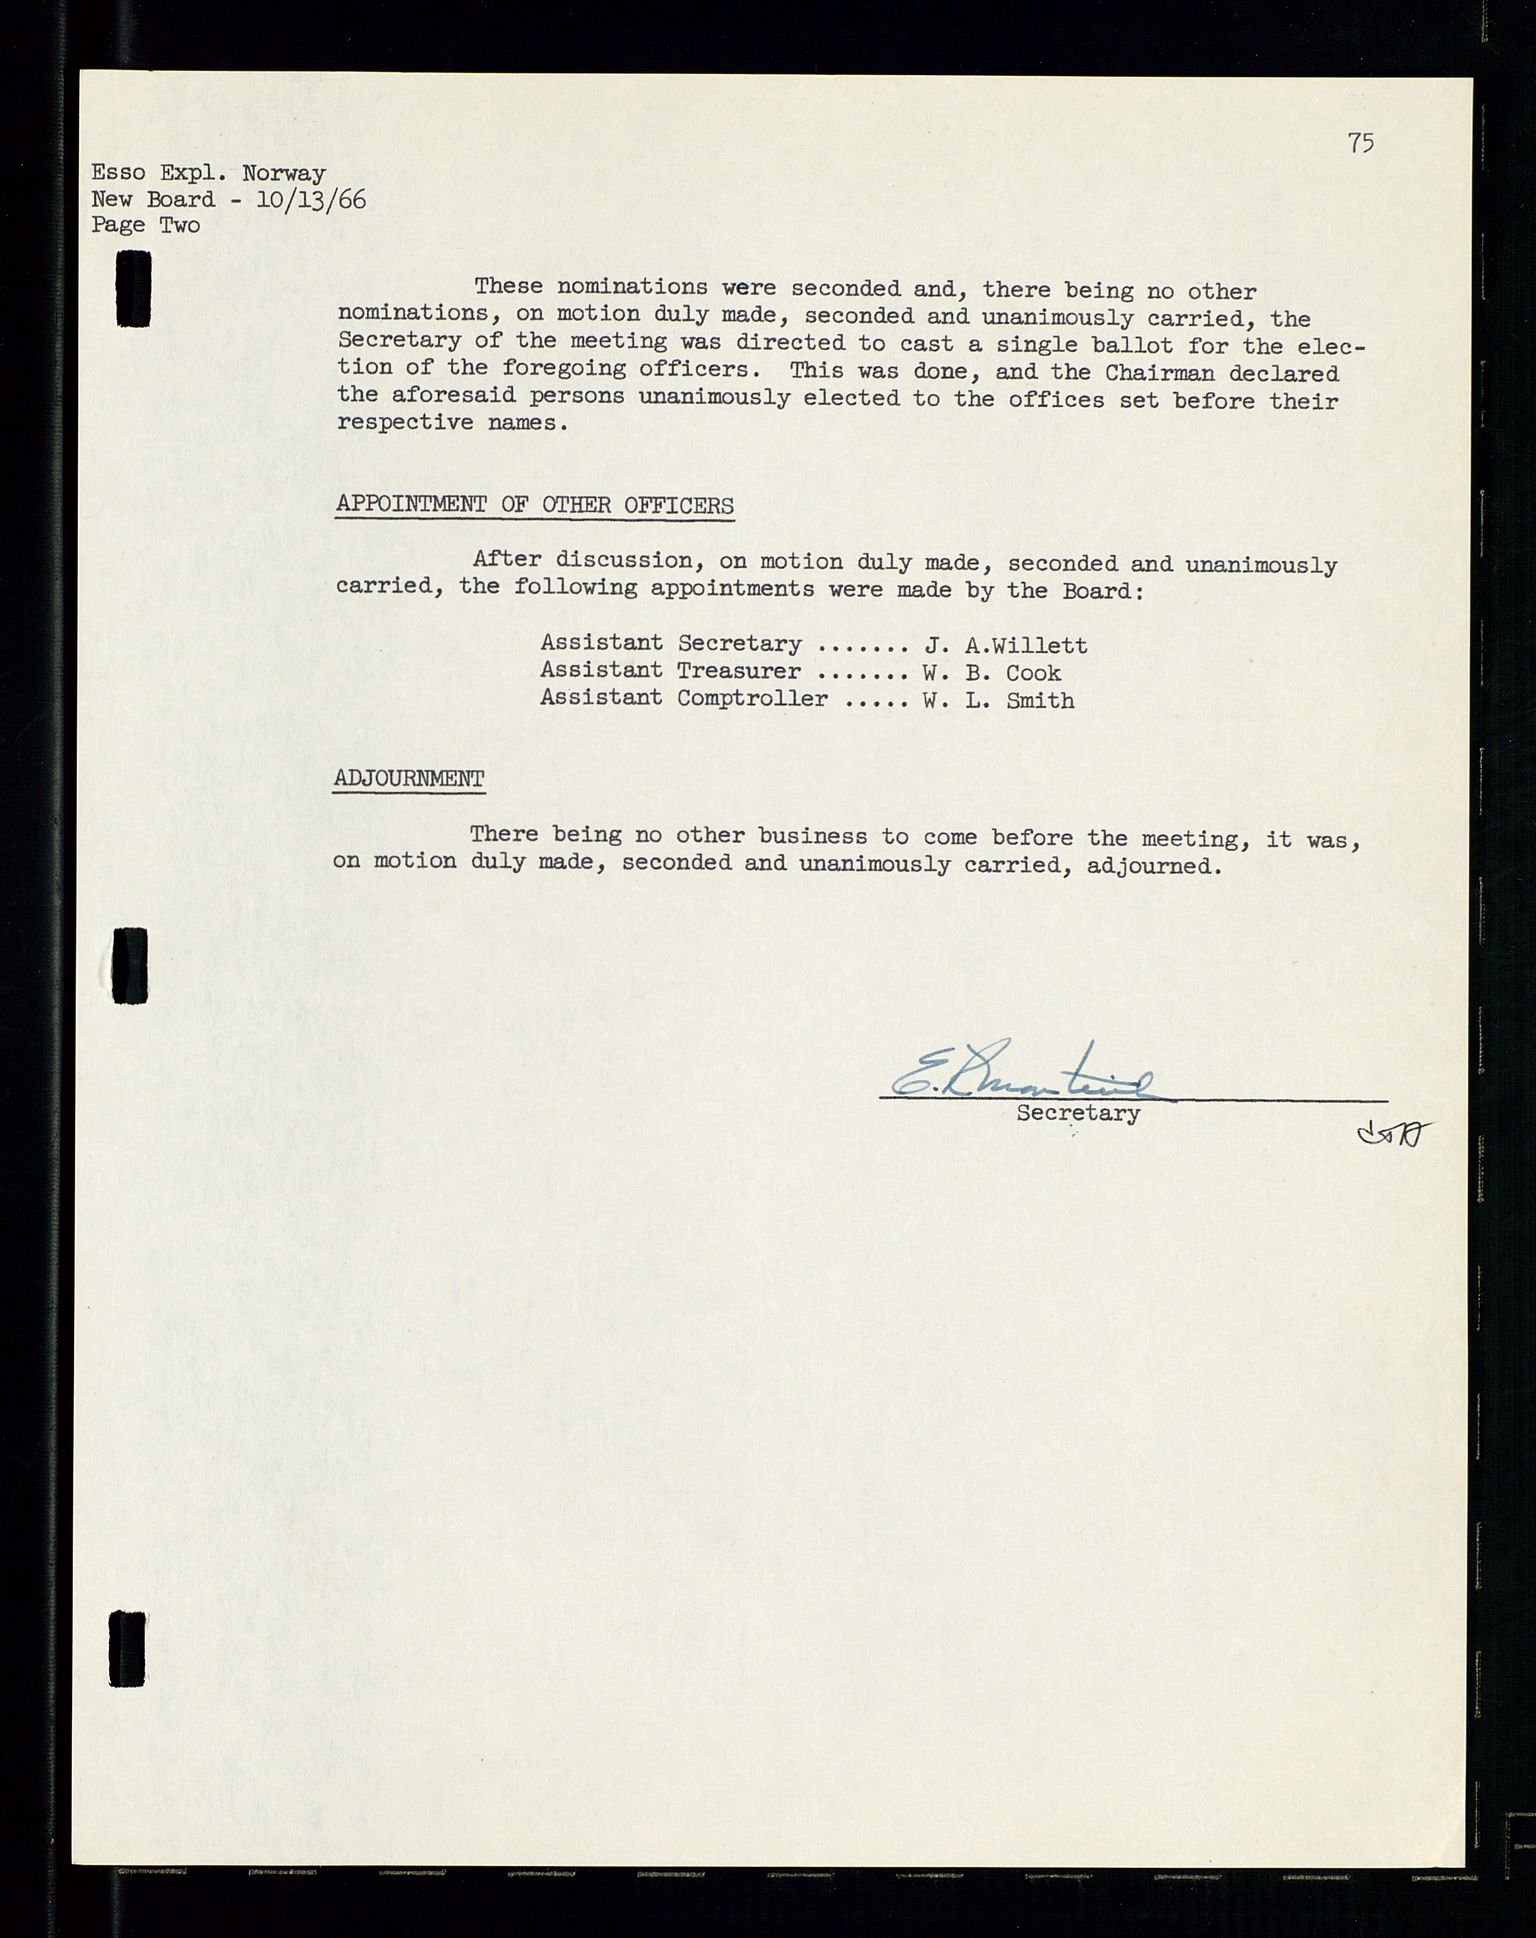 Pa 1512 - Esso Exploration and Production Norway Inc., SAST/A-101917/A/Aa/L0001/0001: Styredokumenter / Corporate records, By-Laws, Board meeting minutes, Incorporations, 1965-1975, s. 75